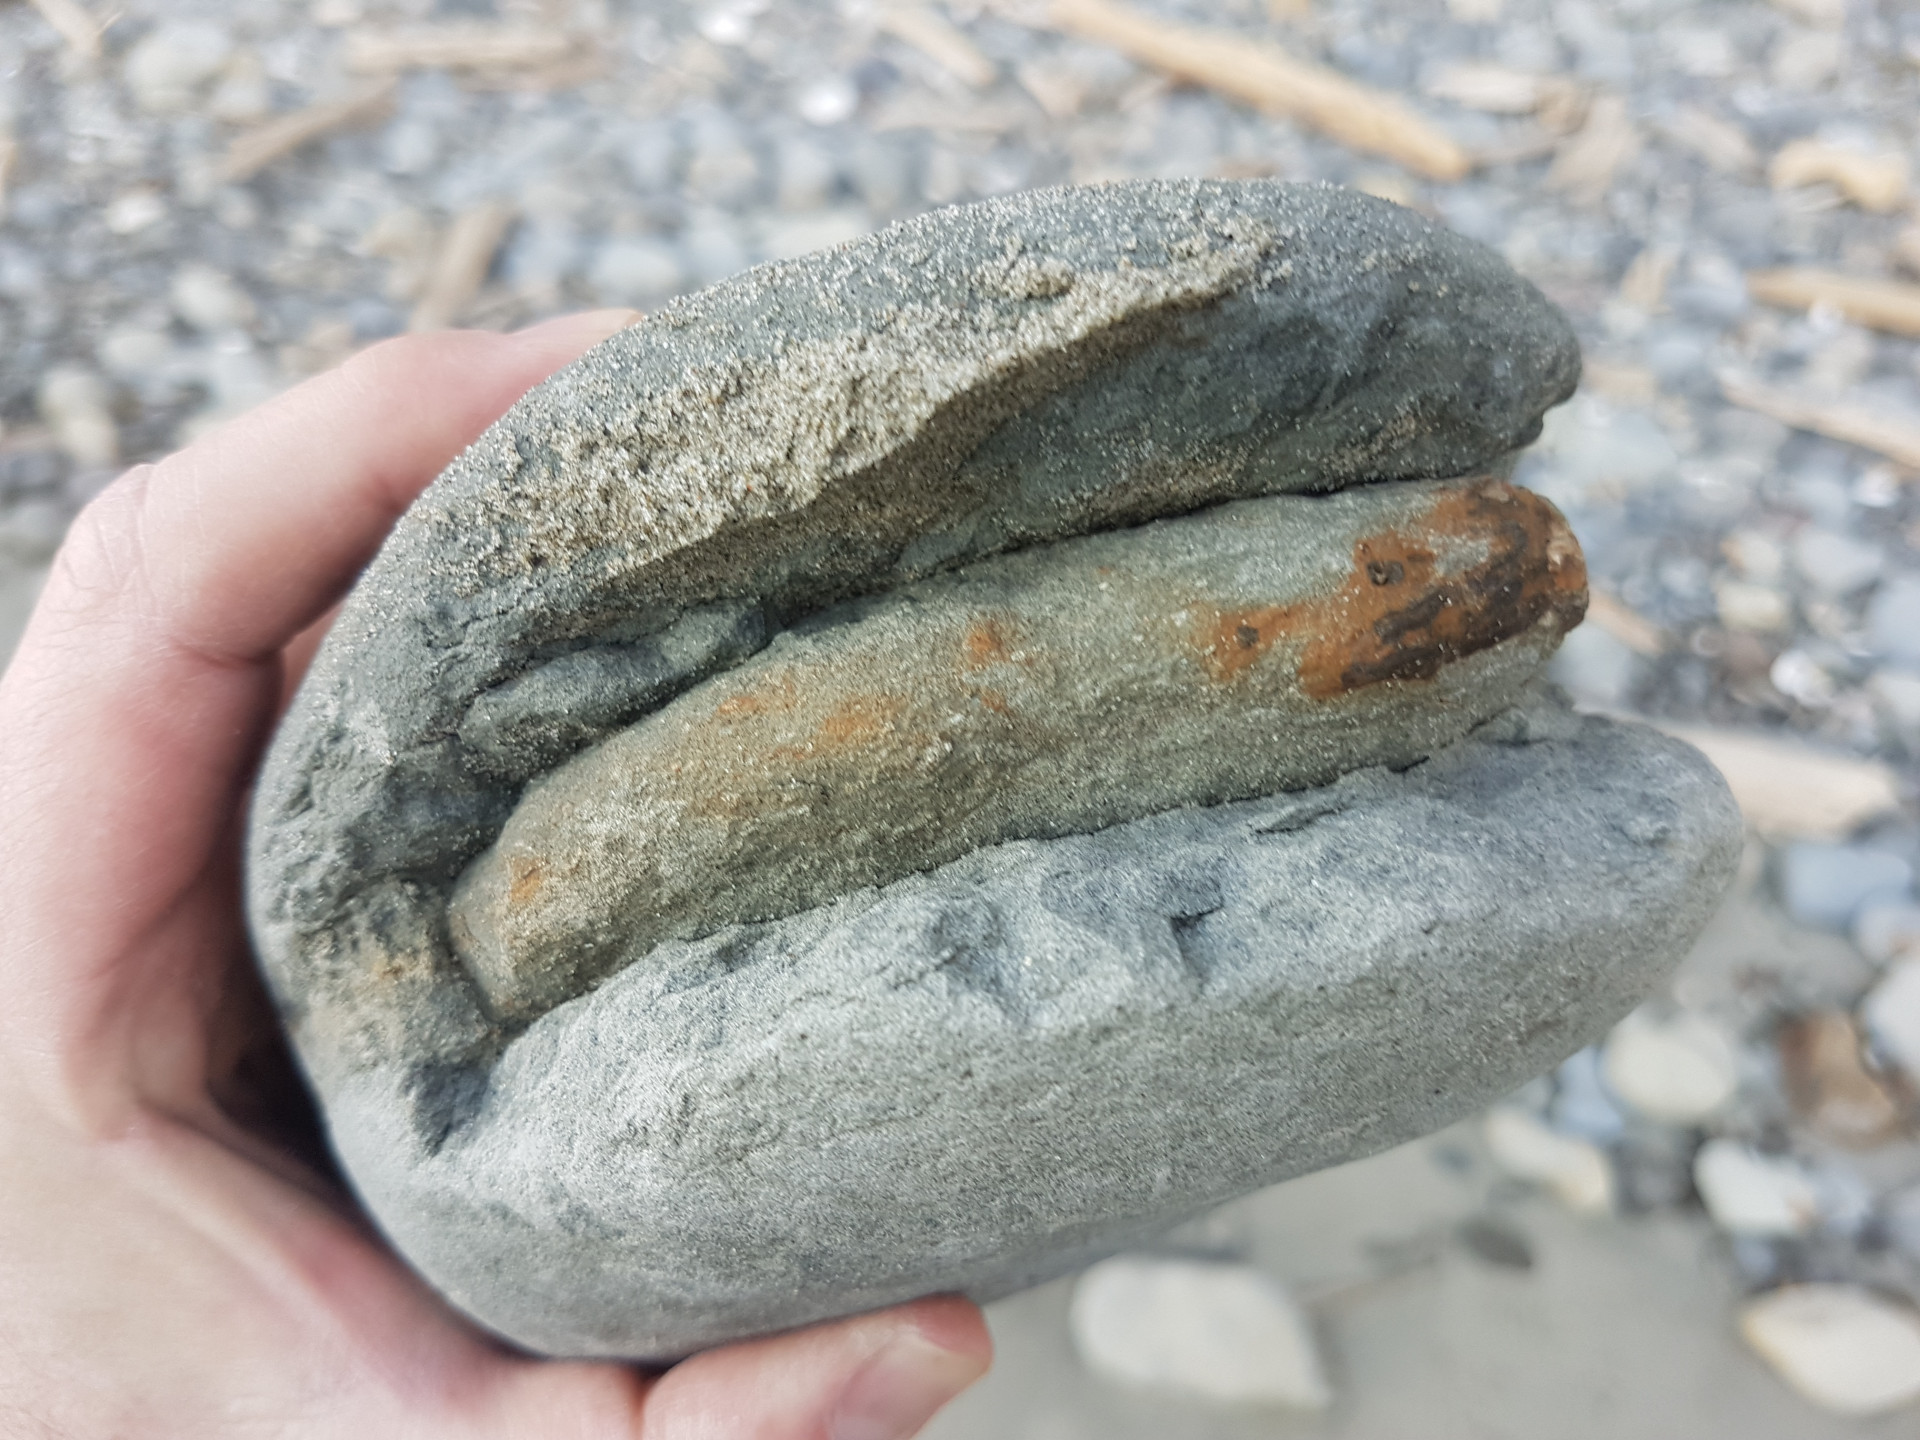 Large claw (crab?)